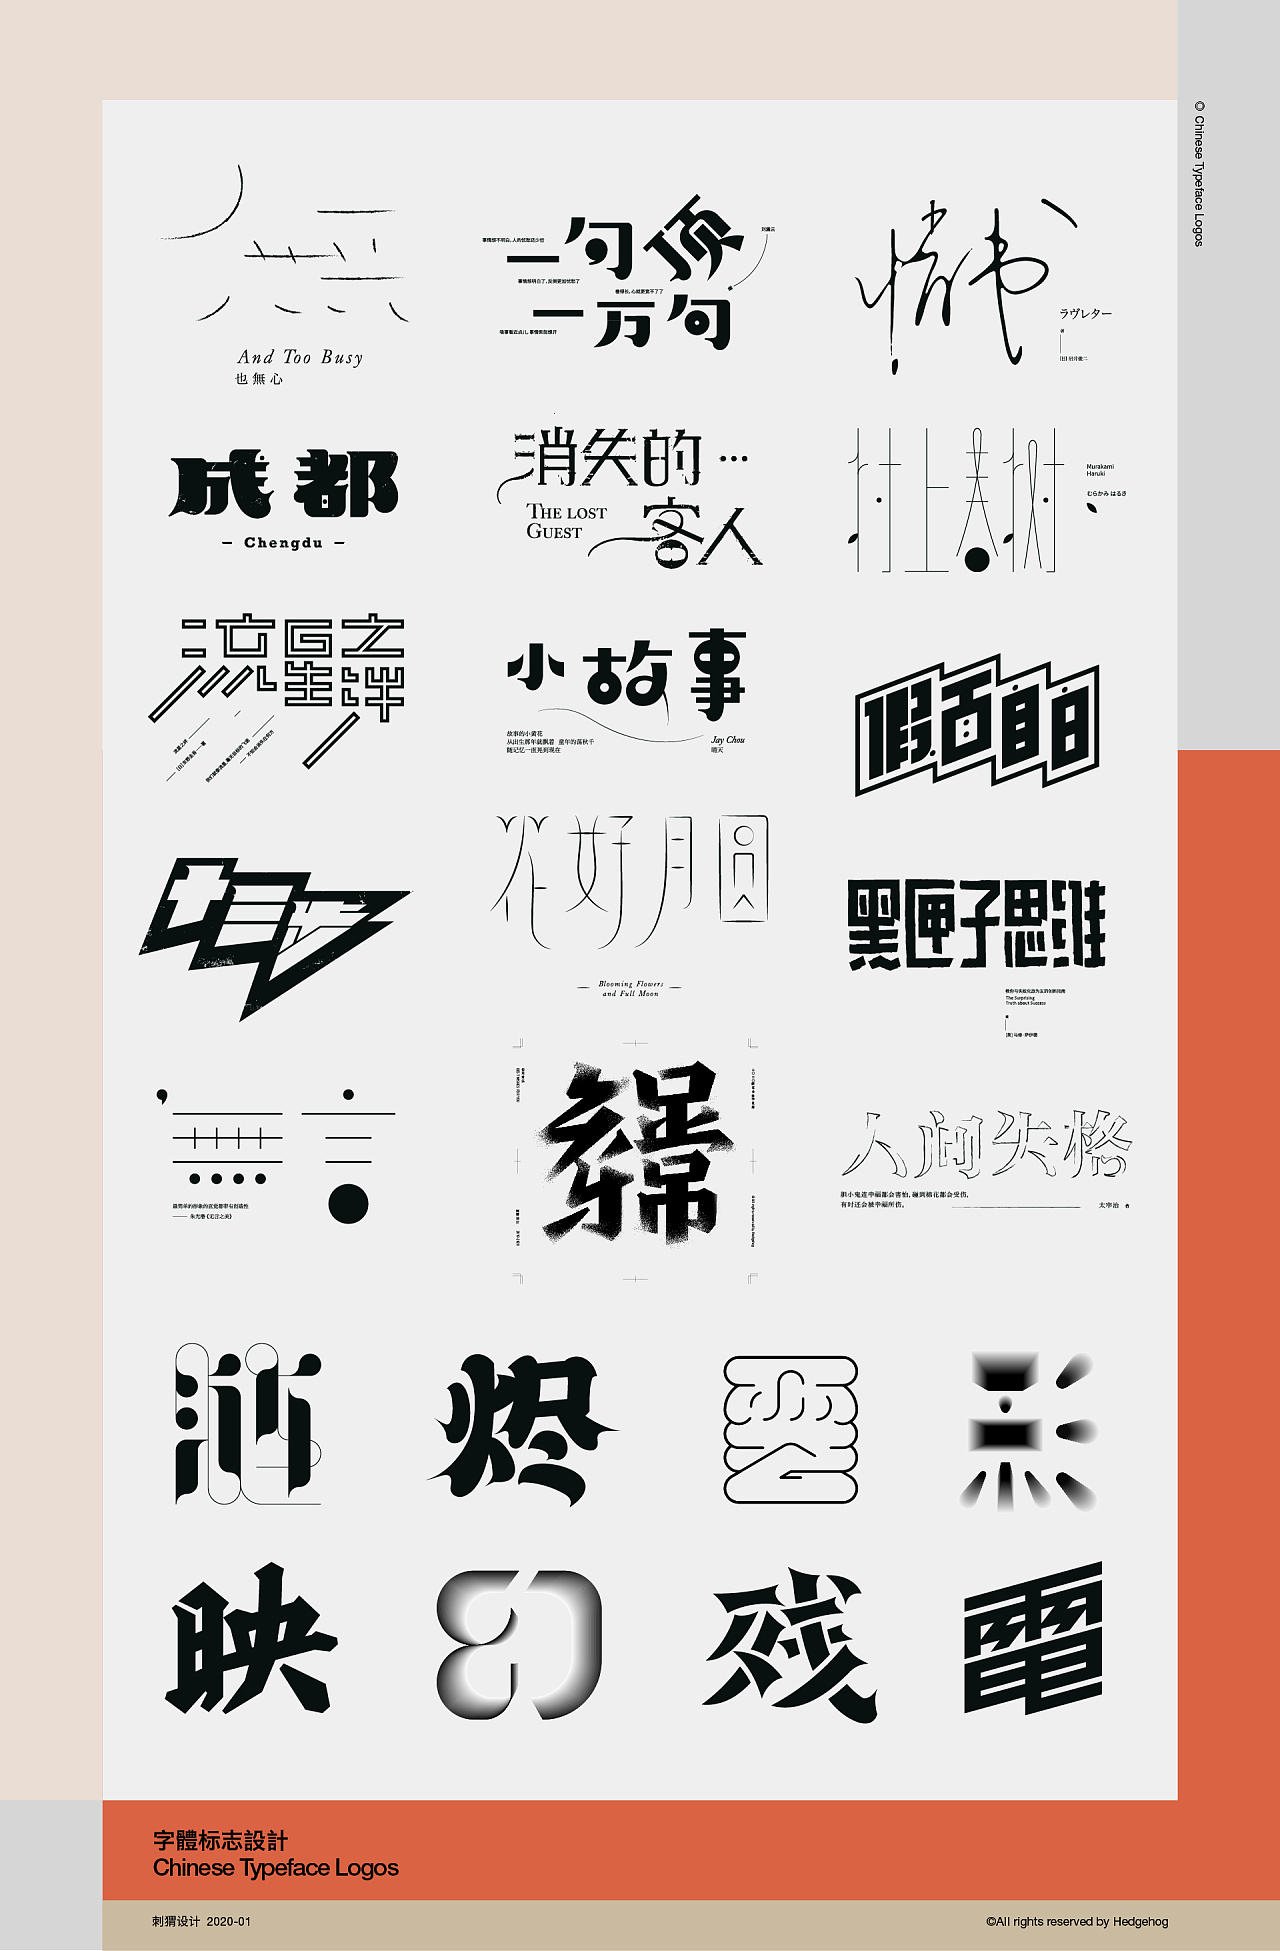 Chinese Creative Font Design-Font logo and book theme characters with dynamic effect